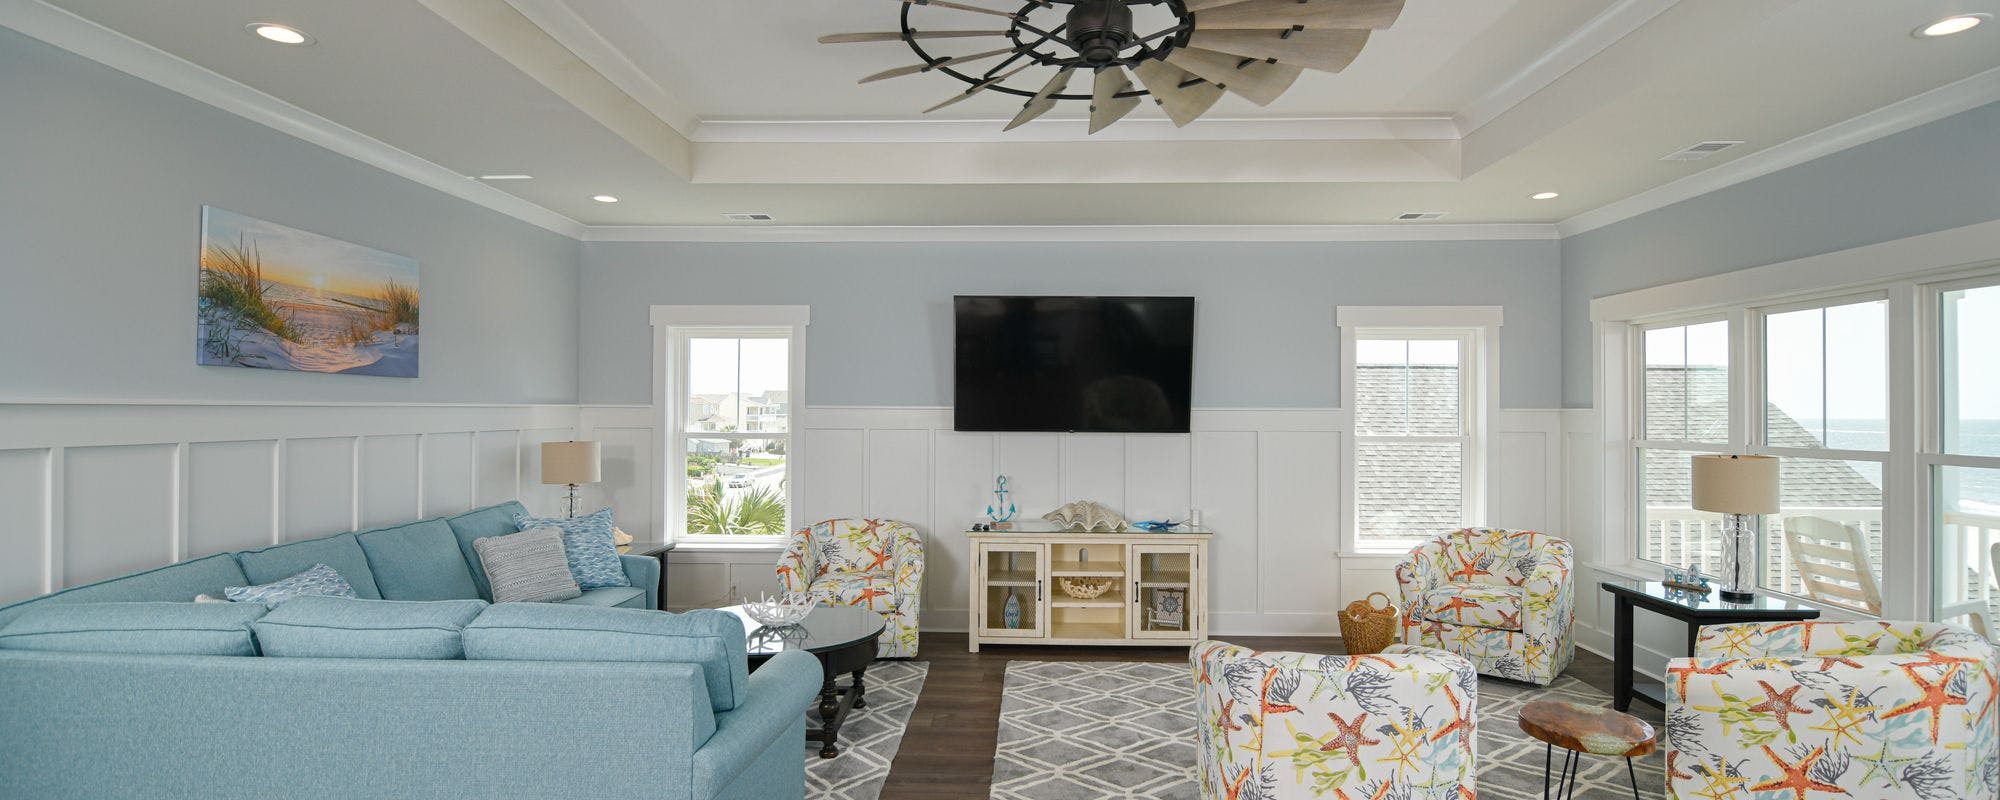 Coastal chic living space in Holden Beach vacation rental